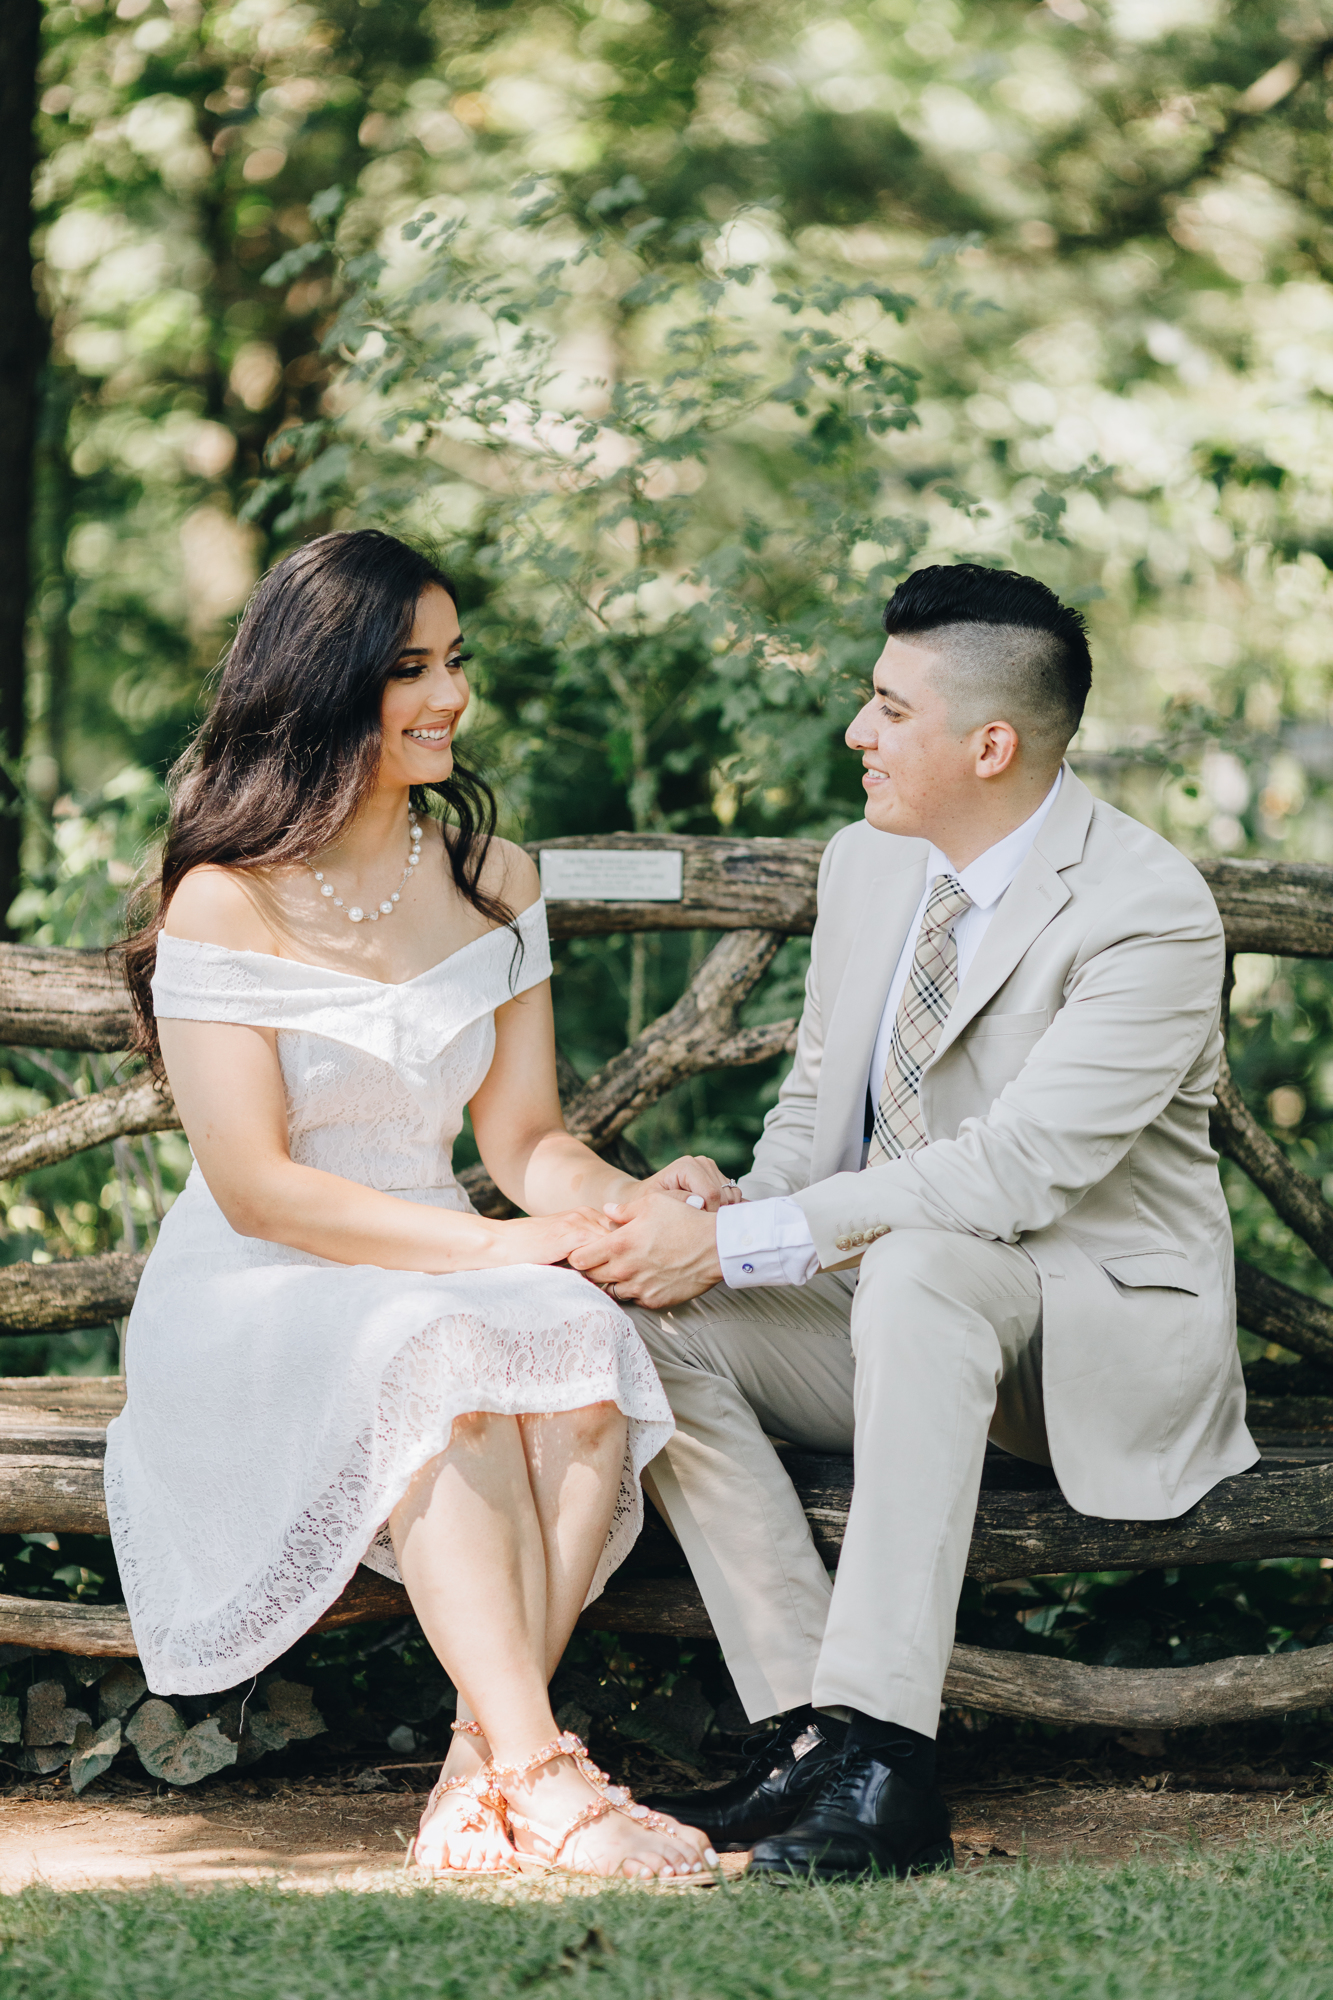 Beautiful Locations in Central Park for Engagement Photography